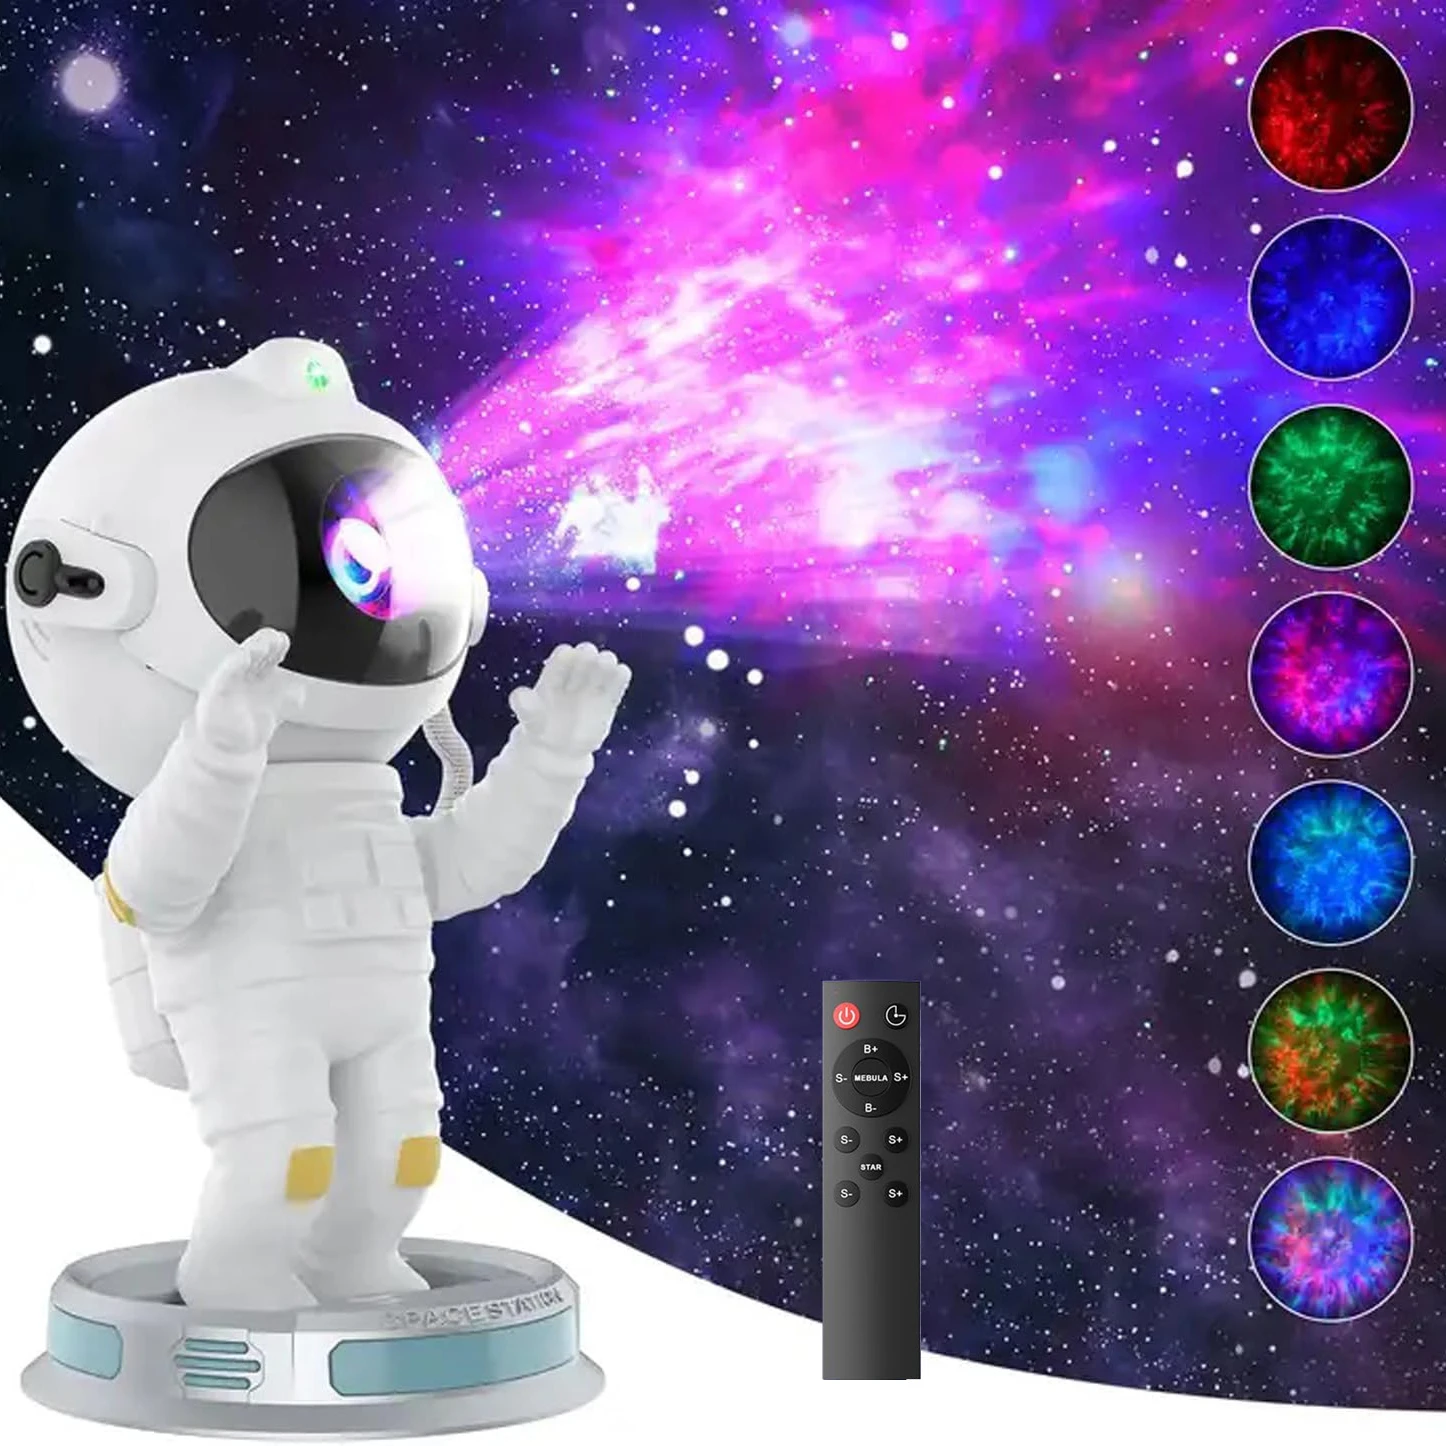 

Astronaut Starry Sky Projector Night Light Nebula Galaxy Projection Lamp 360° Rotating for Home Ceiling Bedroom Decor Kids Gifts